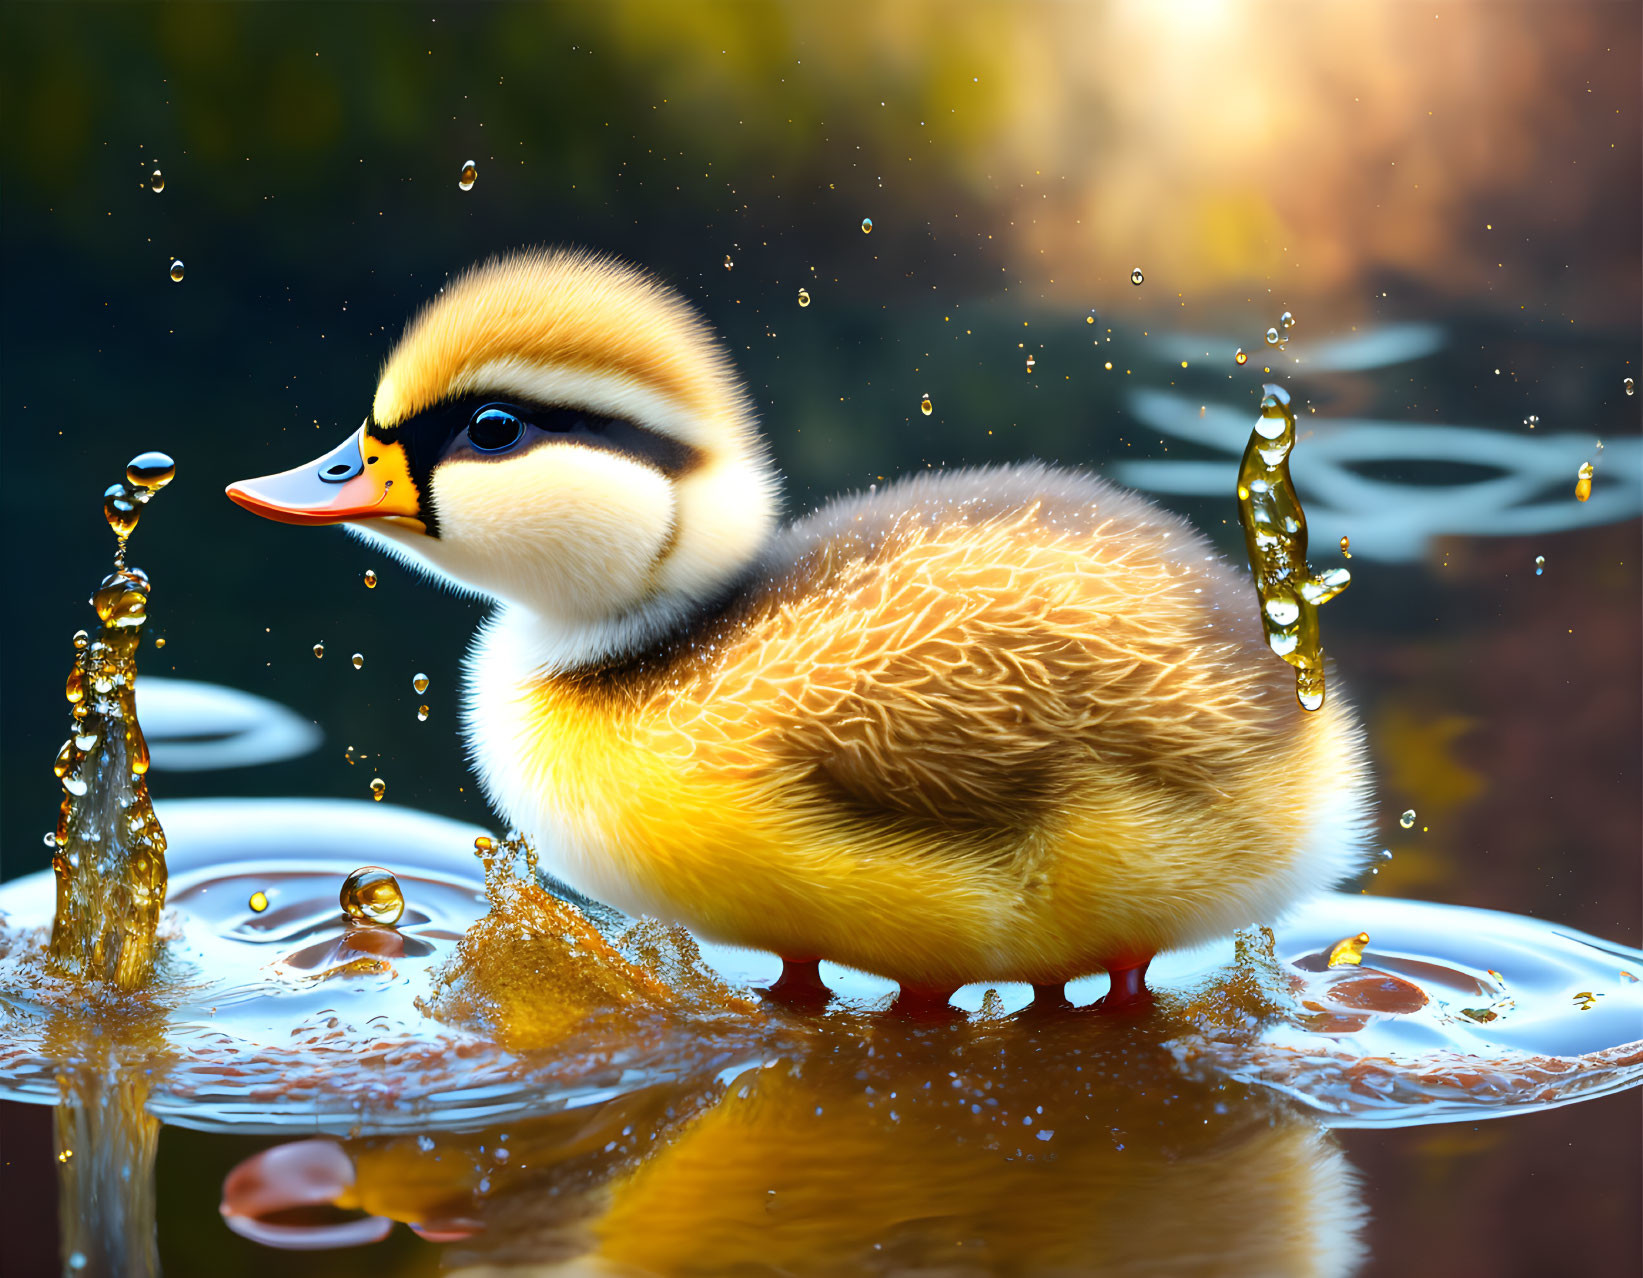 Fluffy duckling on water with golden light and nature backdrop